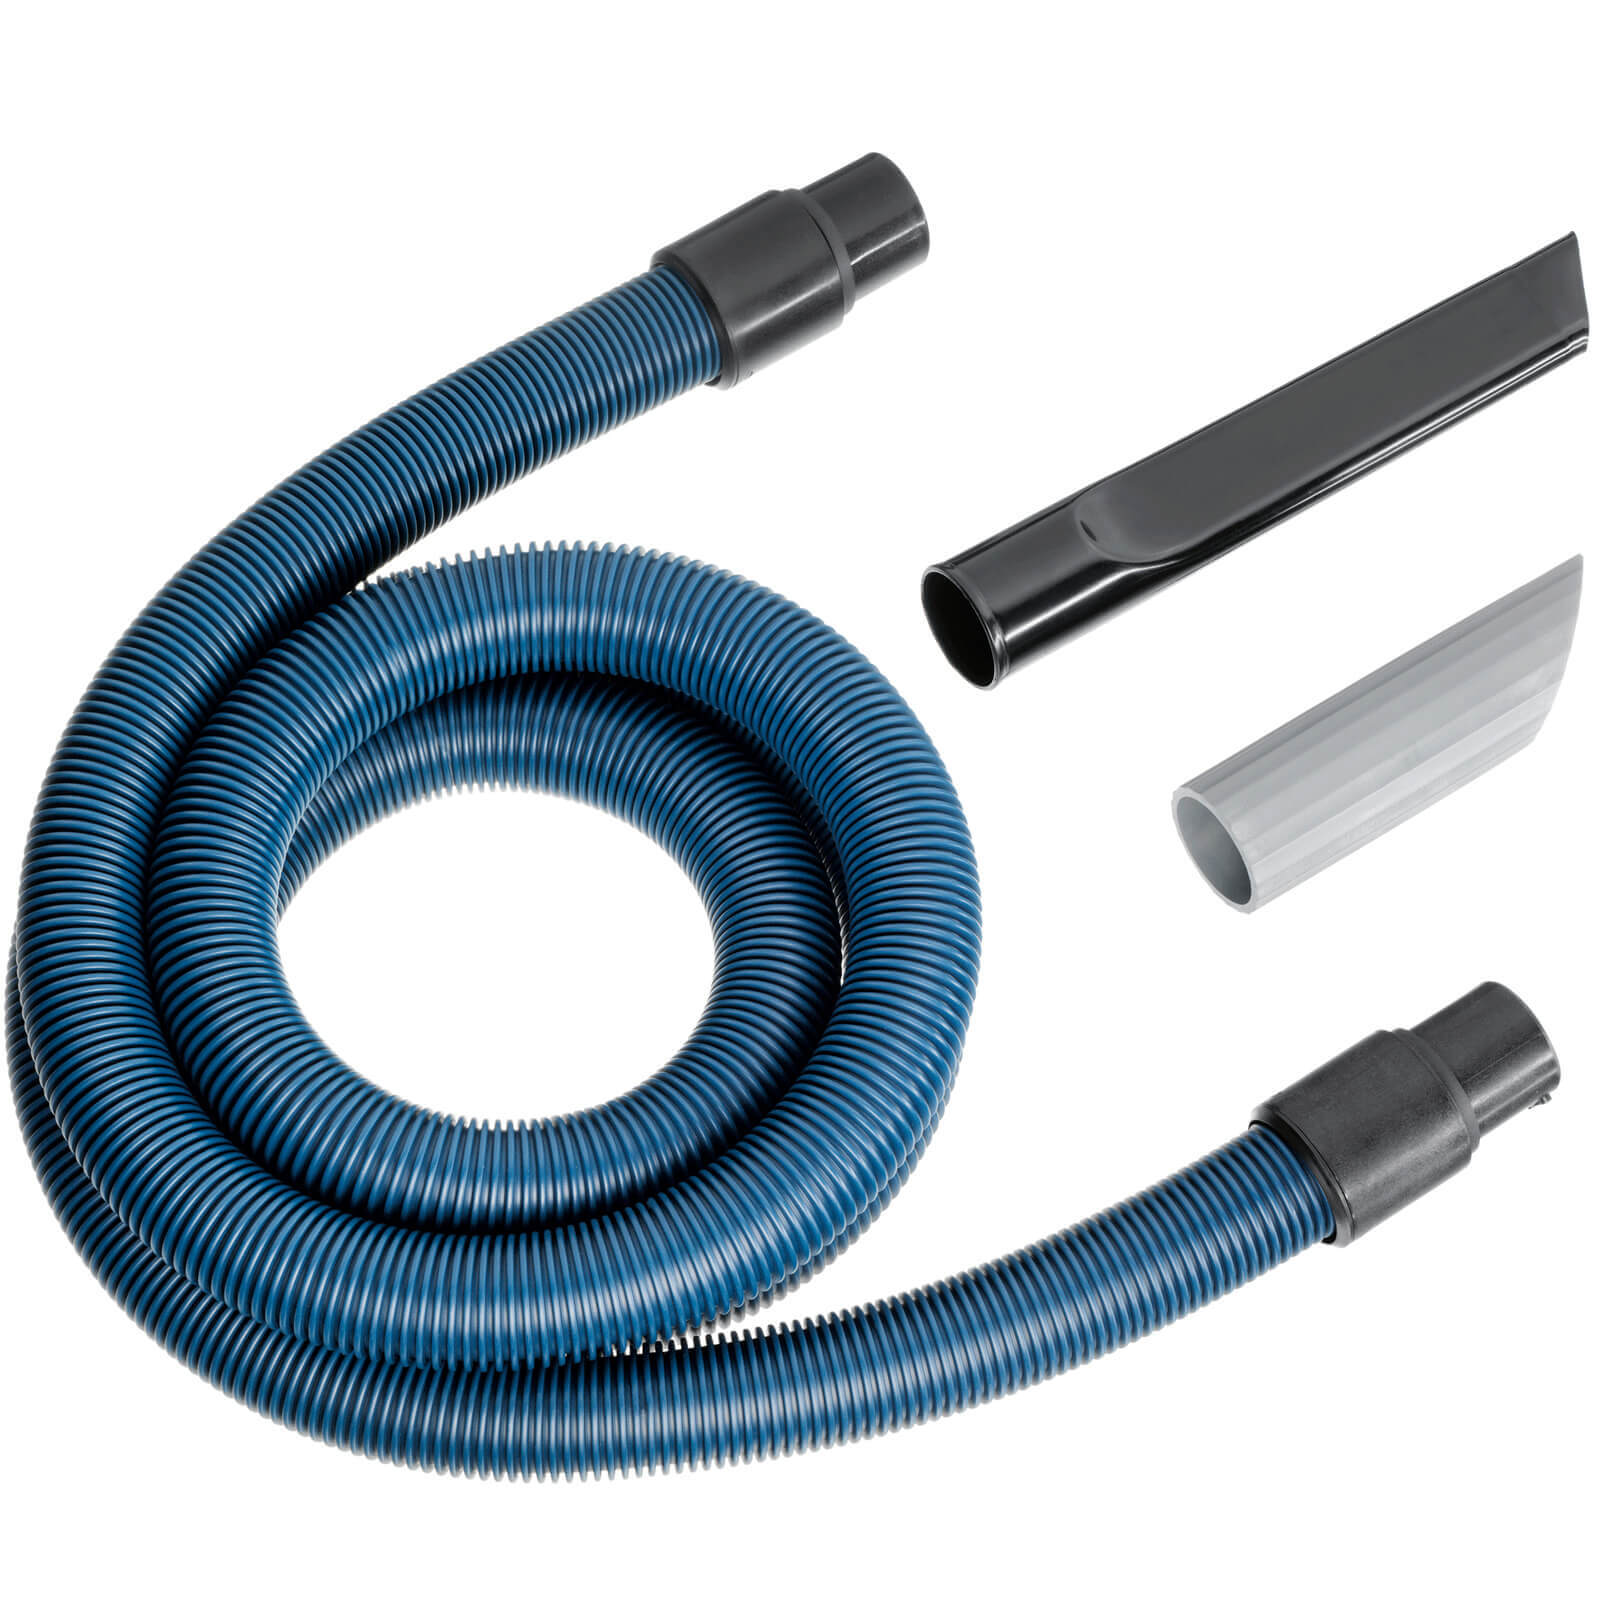 Karcher Oil Proof Suction Hose and Tools for NT 65/2 and 70/2 Vacuum Cleaners 40mm 4m